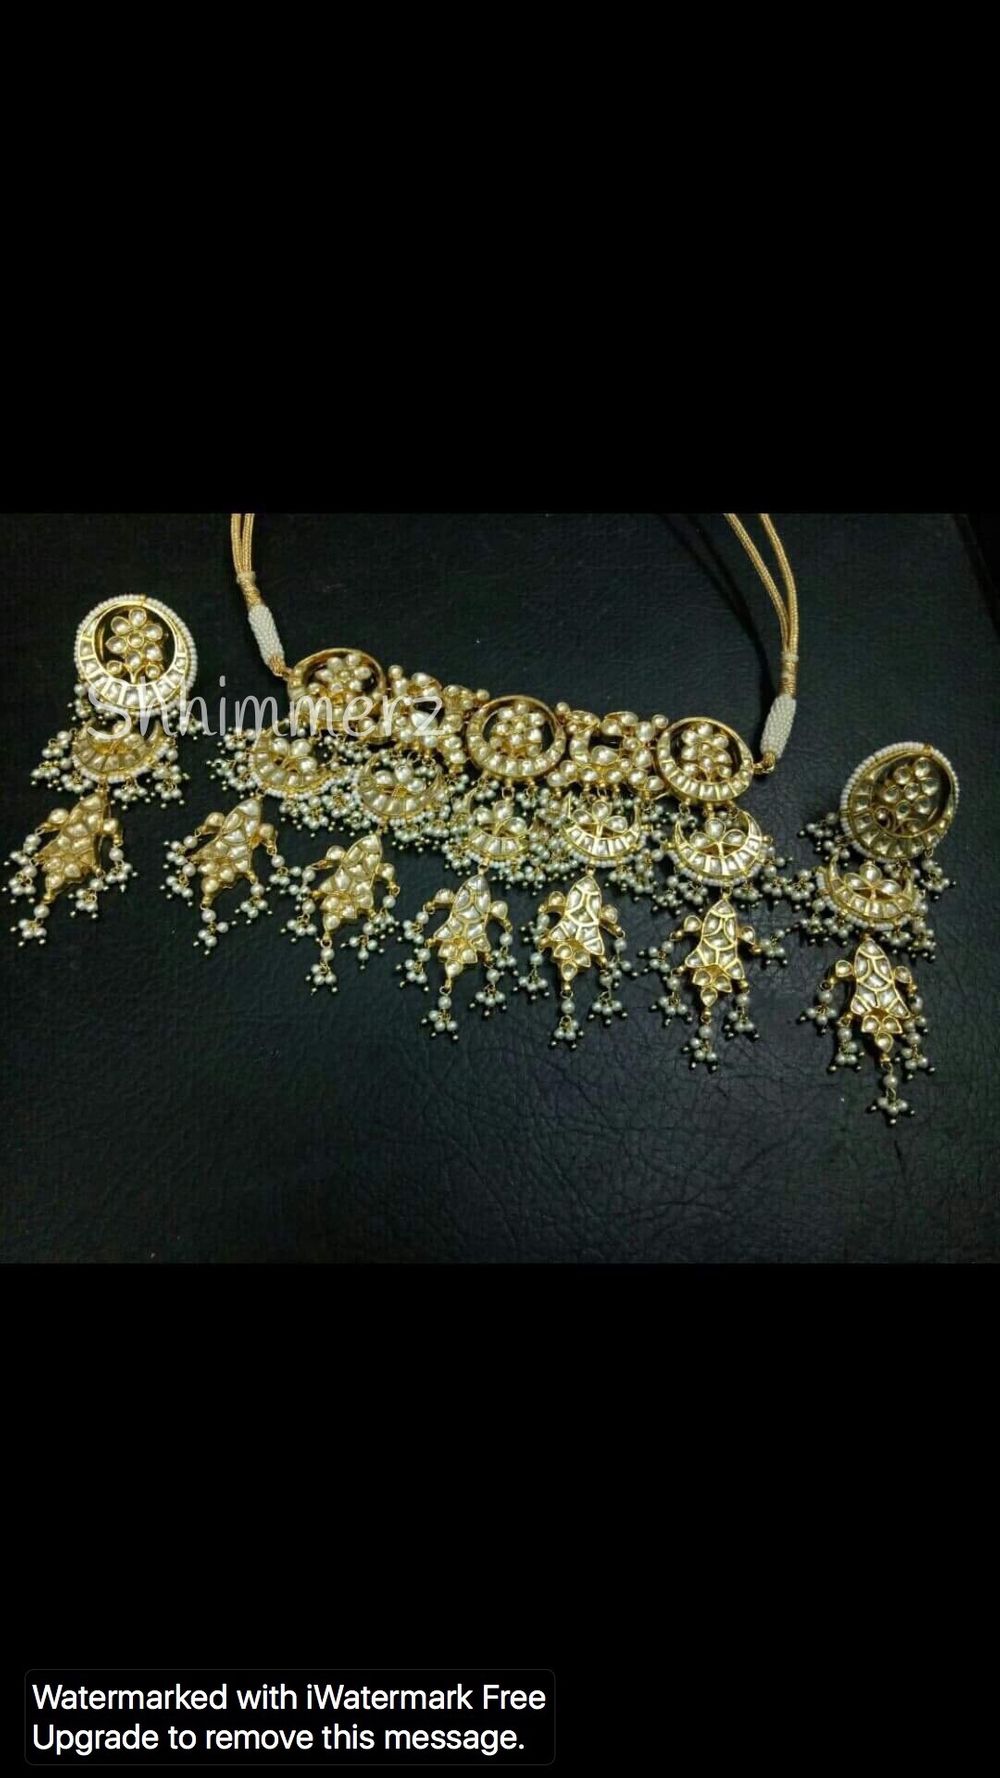 Photo From neckpieces  - By Shhimmerz